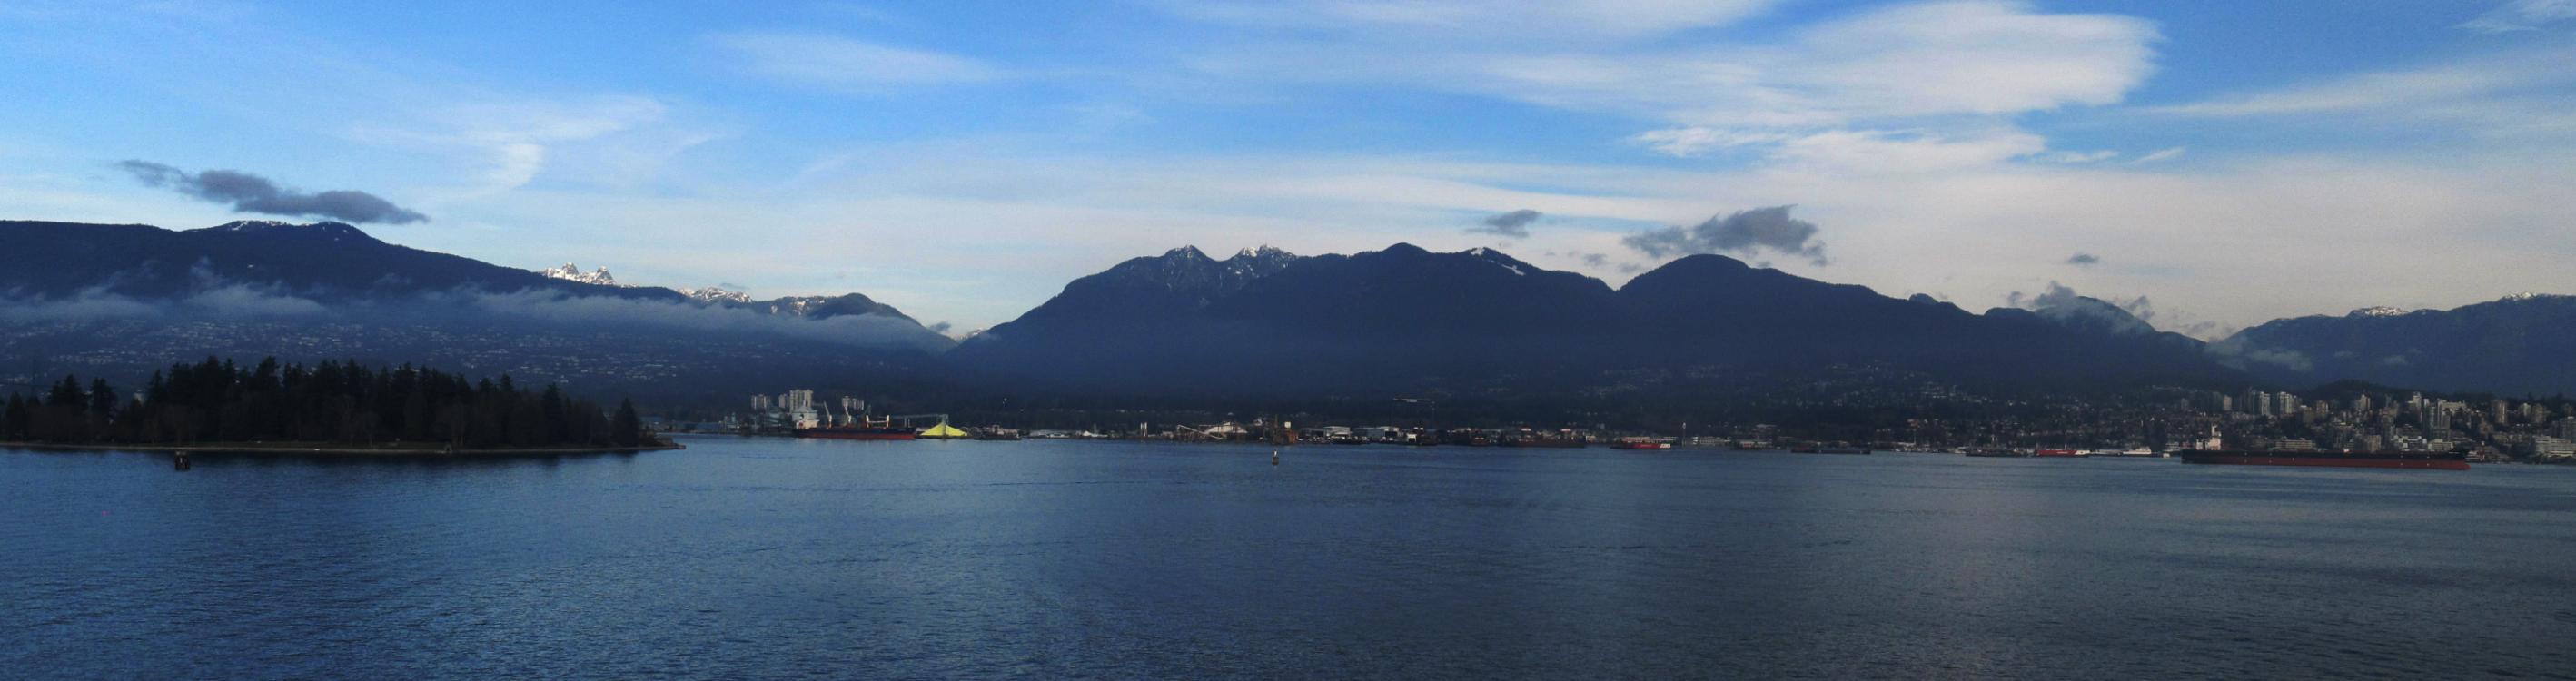 Die North Shore Mountains bei Vancouver.